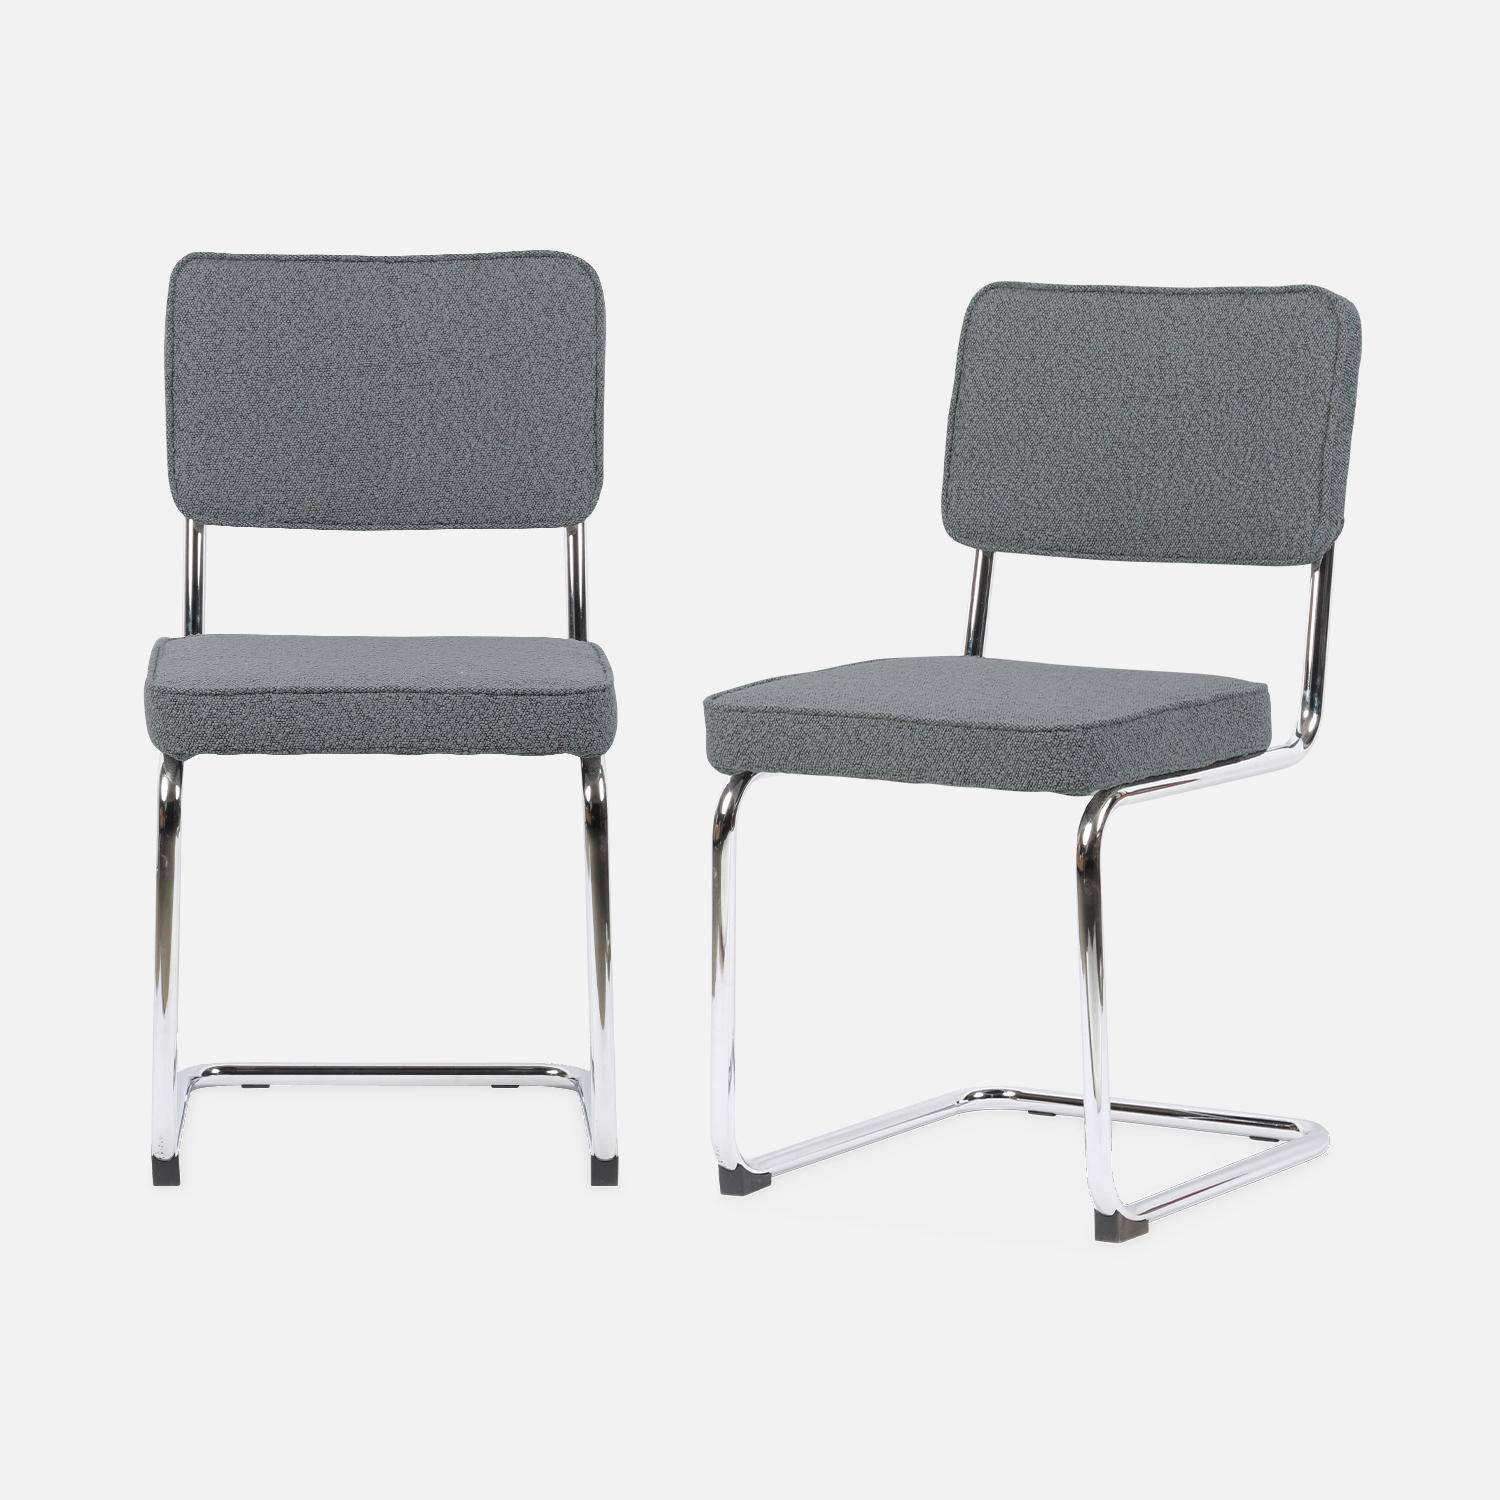 Pair of boucle cantilever dining chairs, 46x54.5x81cm - Maja - Grey Photo4